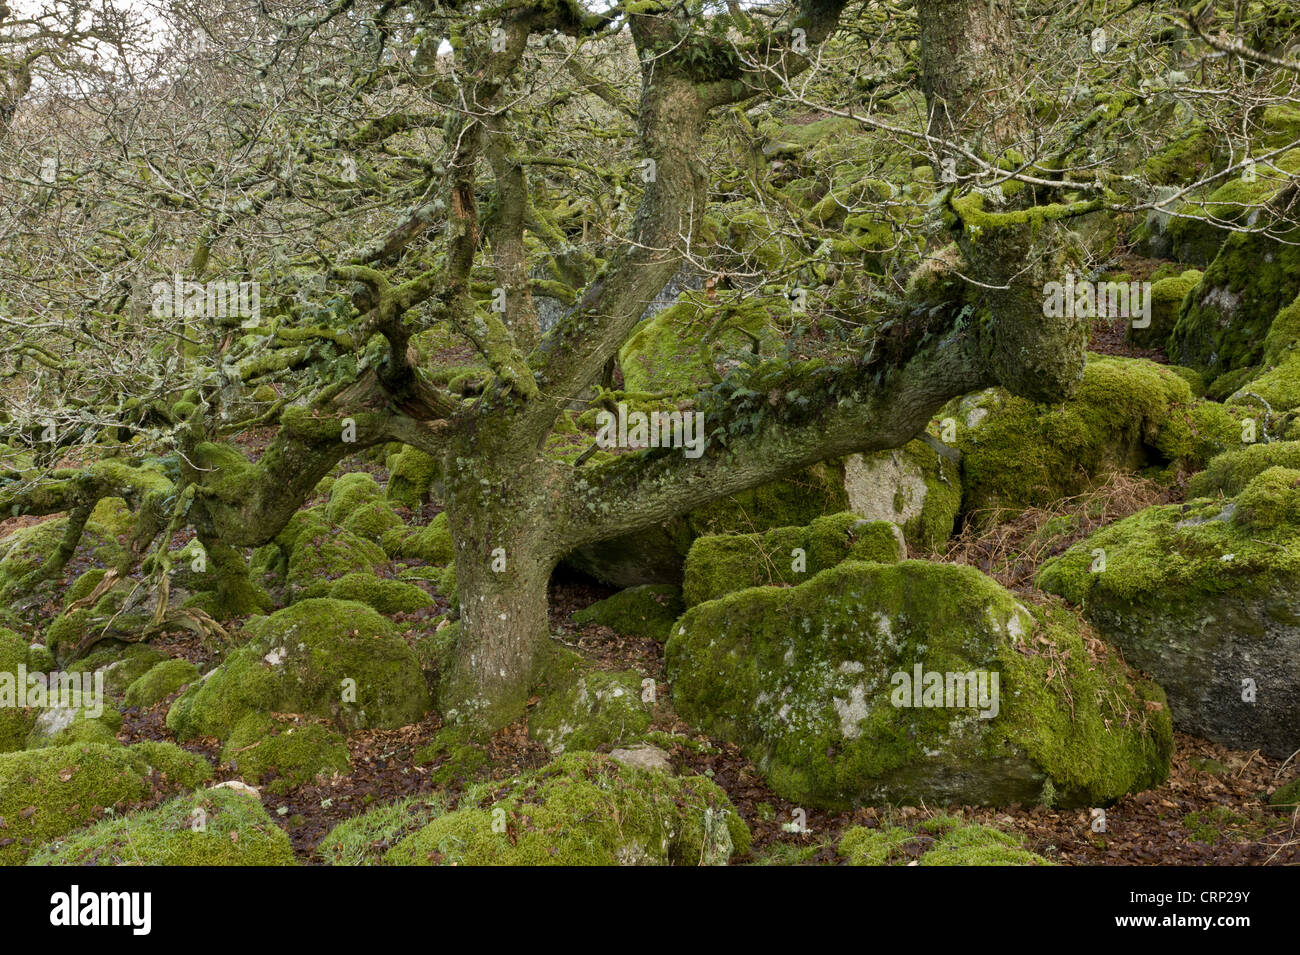 Ancient stunted Common Oak (Quercus sp.) trees growing amongst moss covered boulders in moorland copse habitat, Black-a-Tor Stock Photo